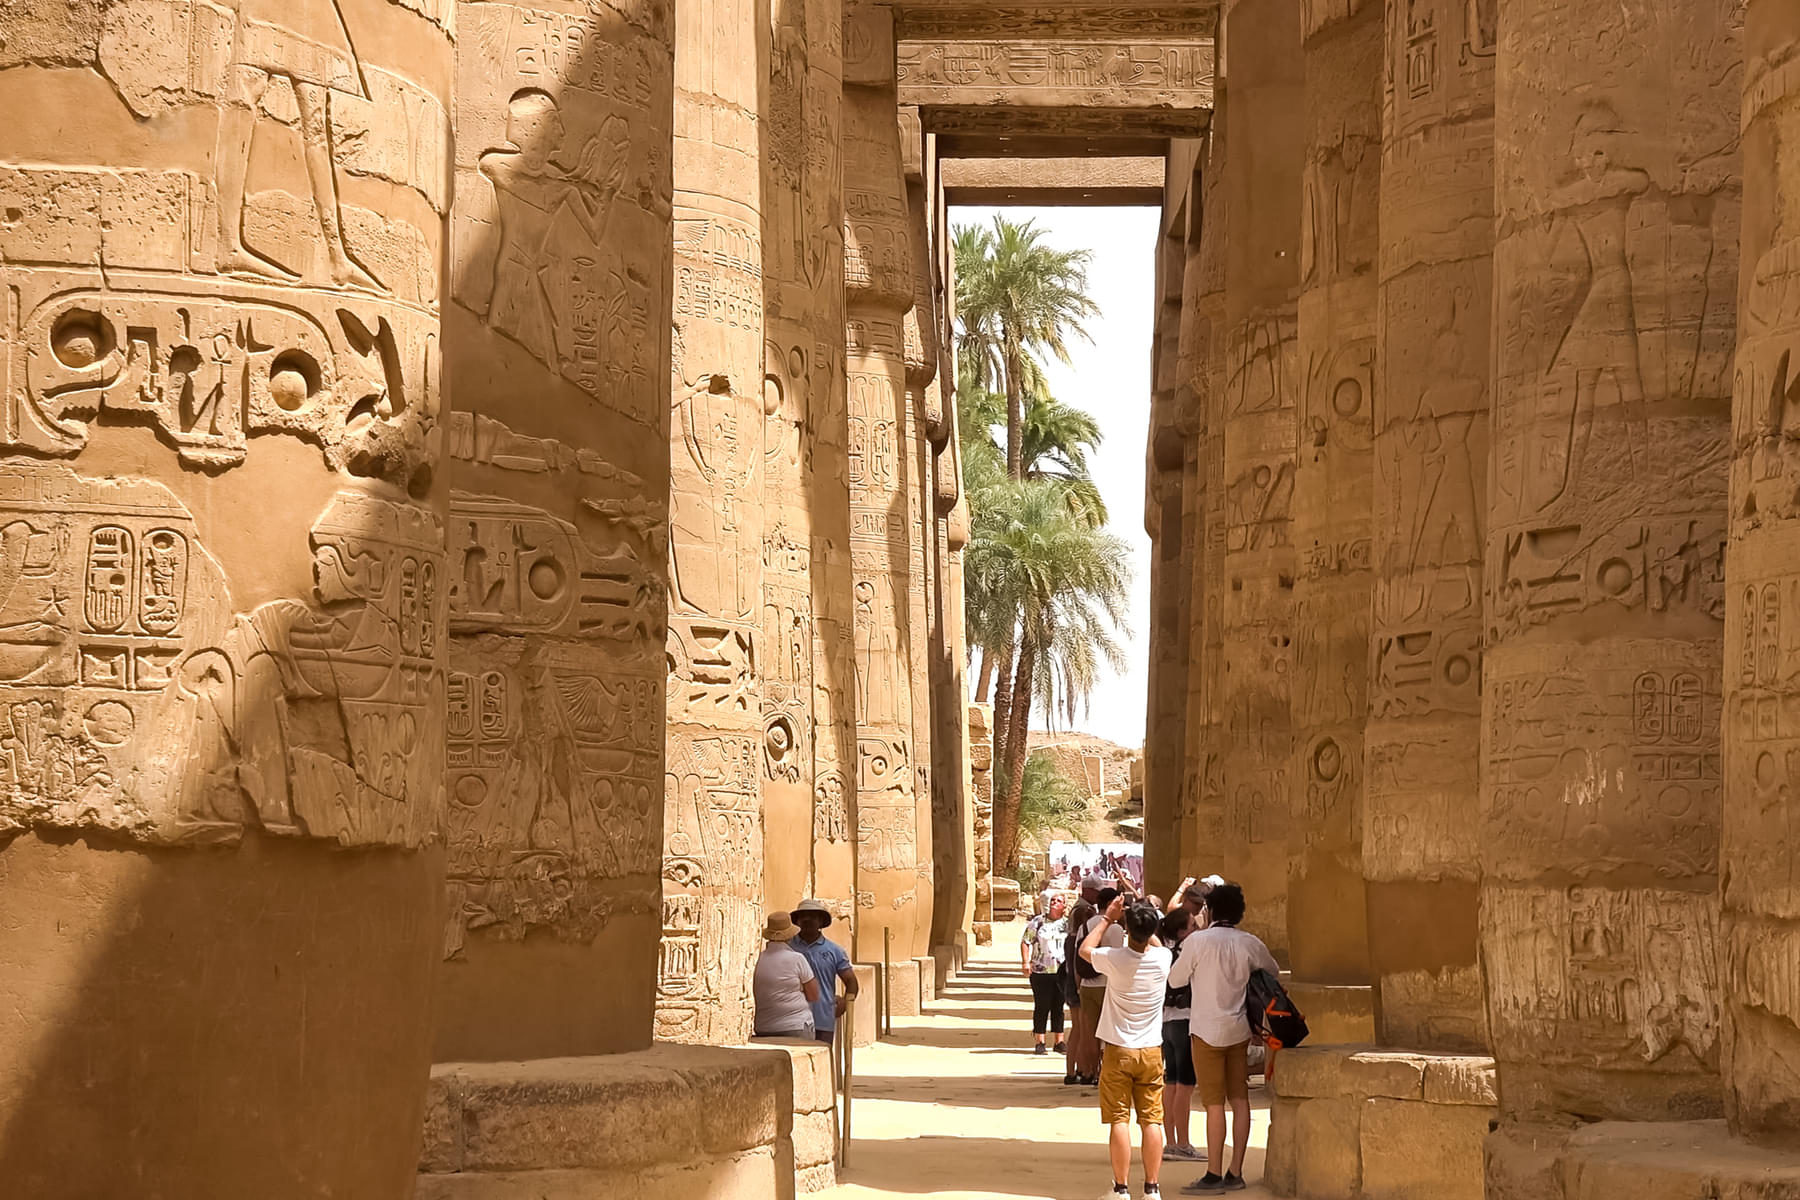 Learn about the rituals of the Egyptians while exploring the complex